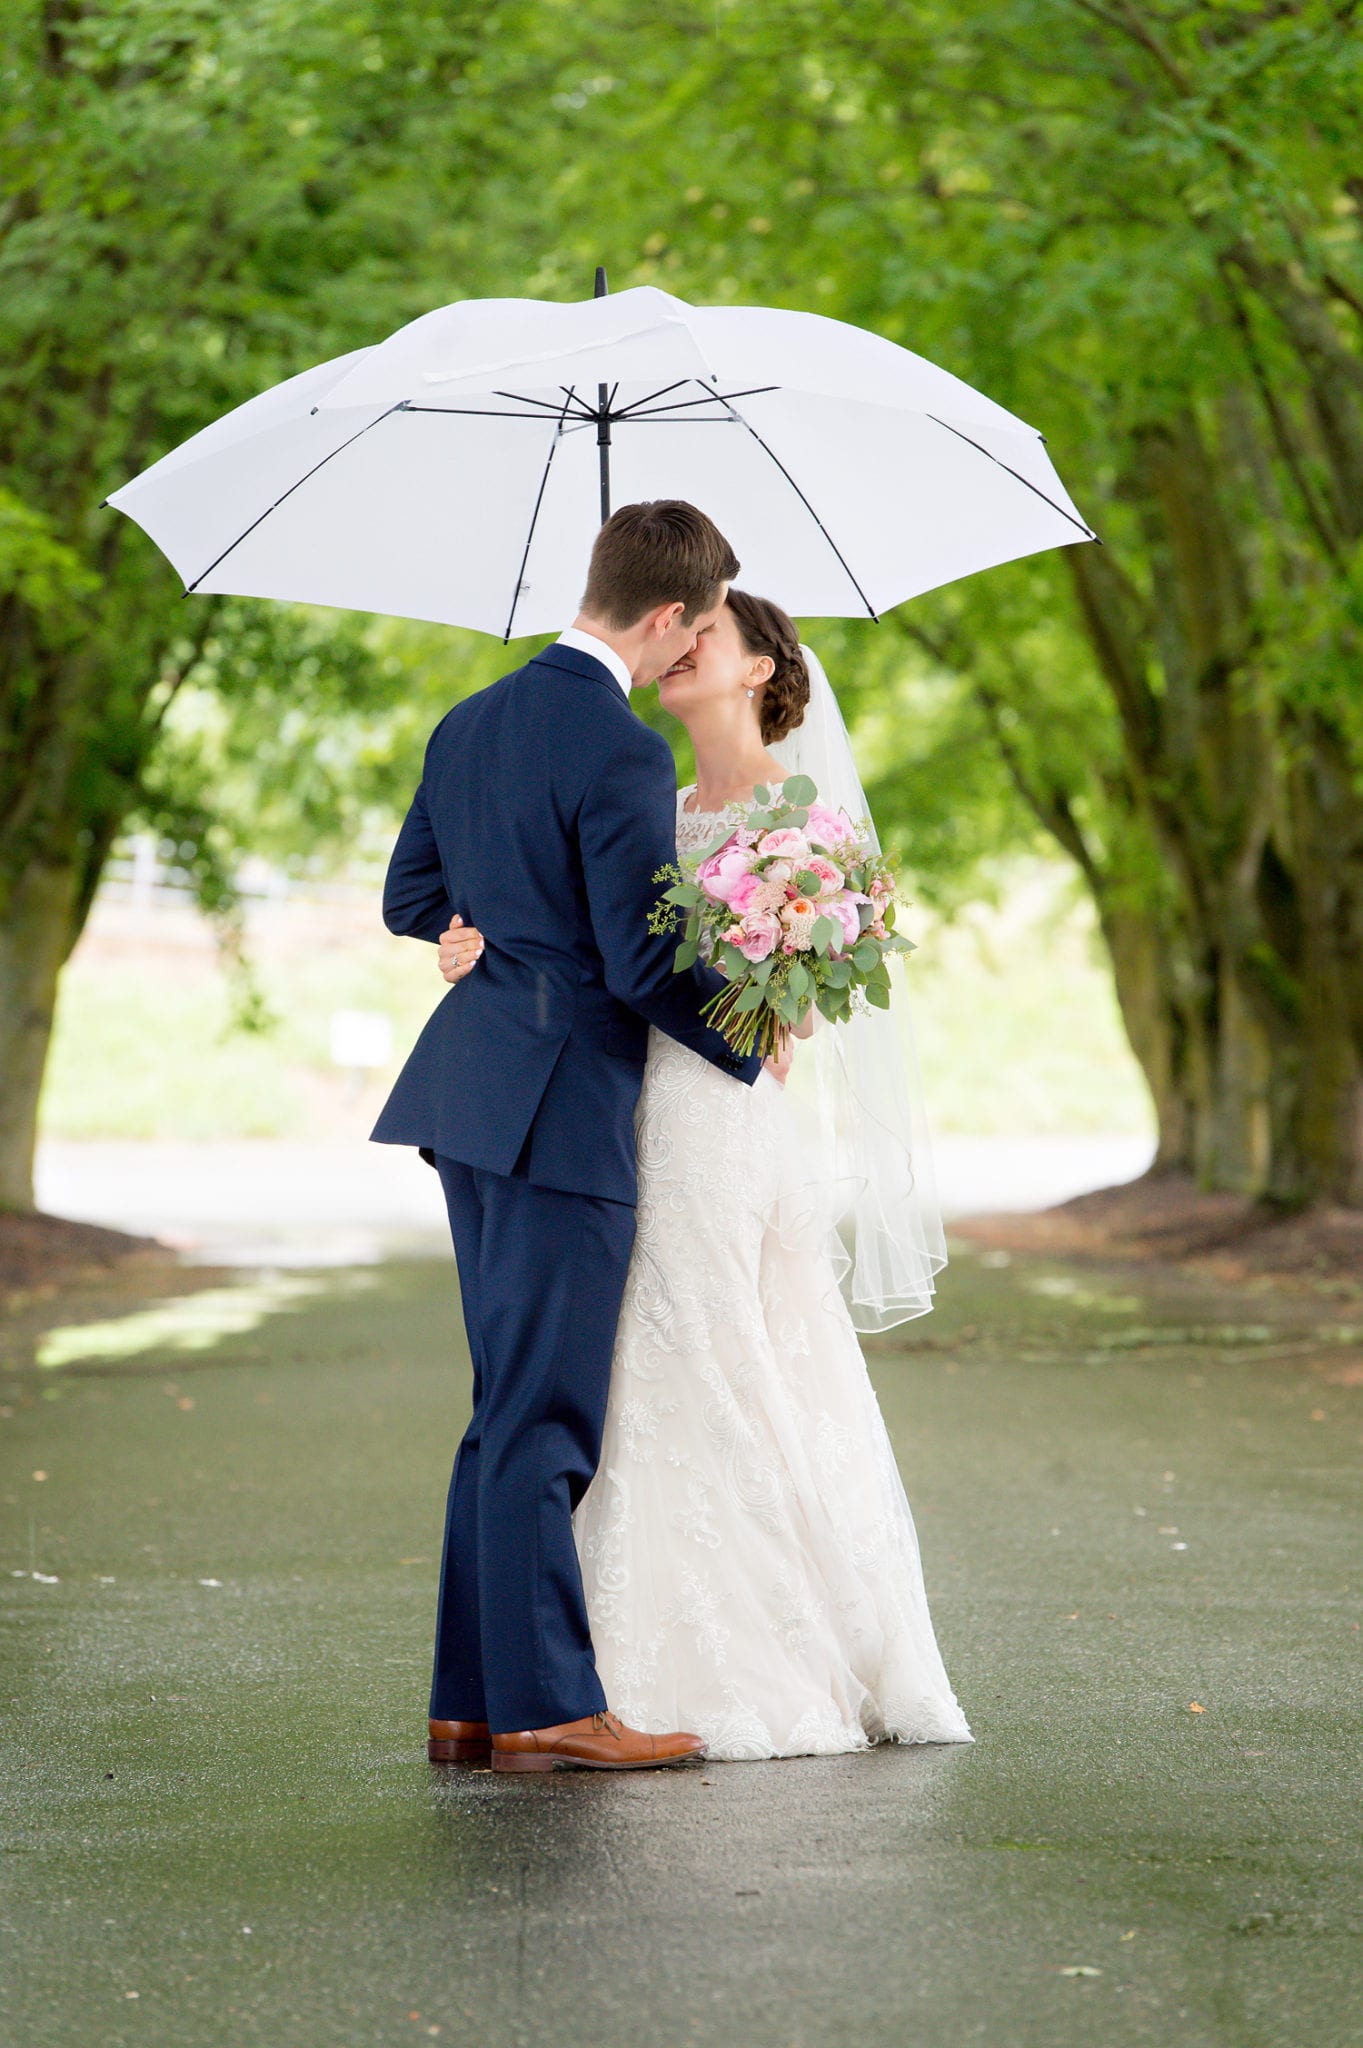 Bride and groom portrait with an umbrella in the row of trees at Maplehurst Farm wedding venue